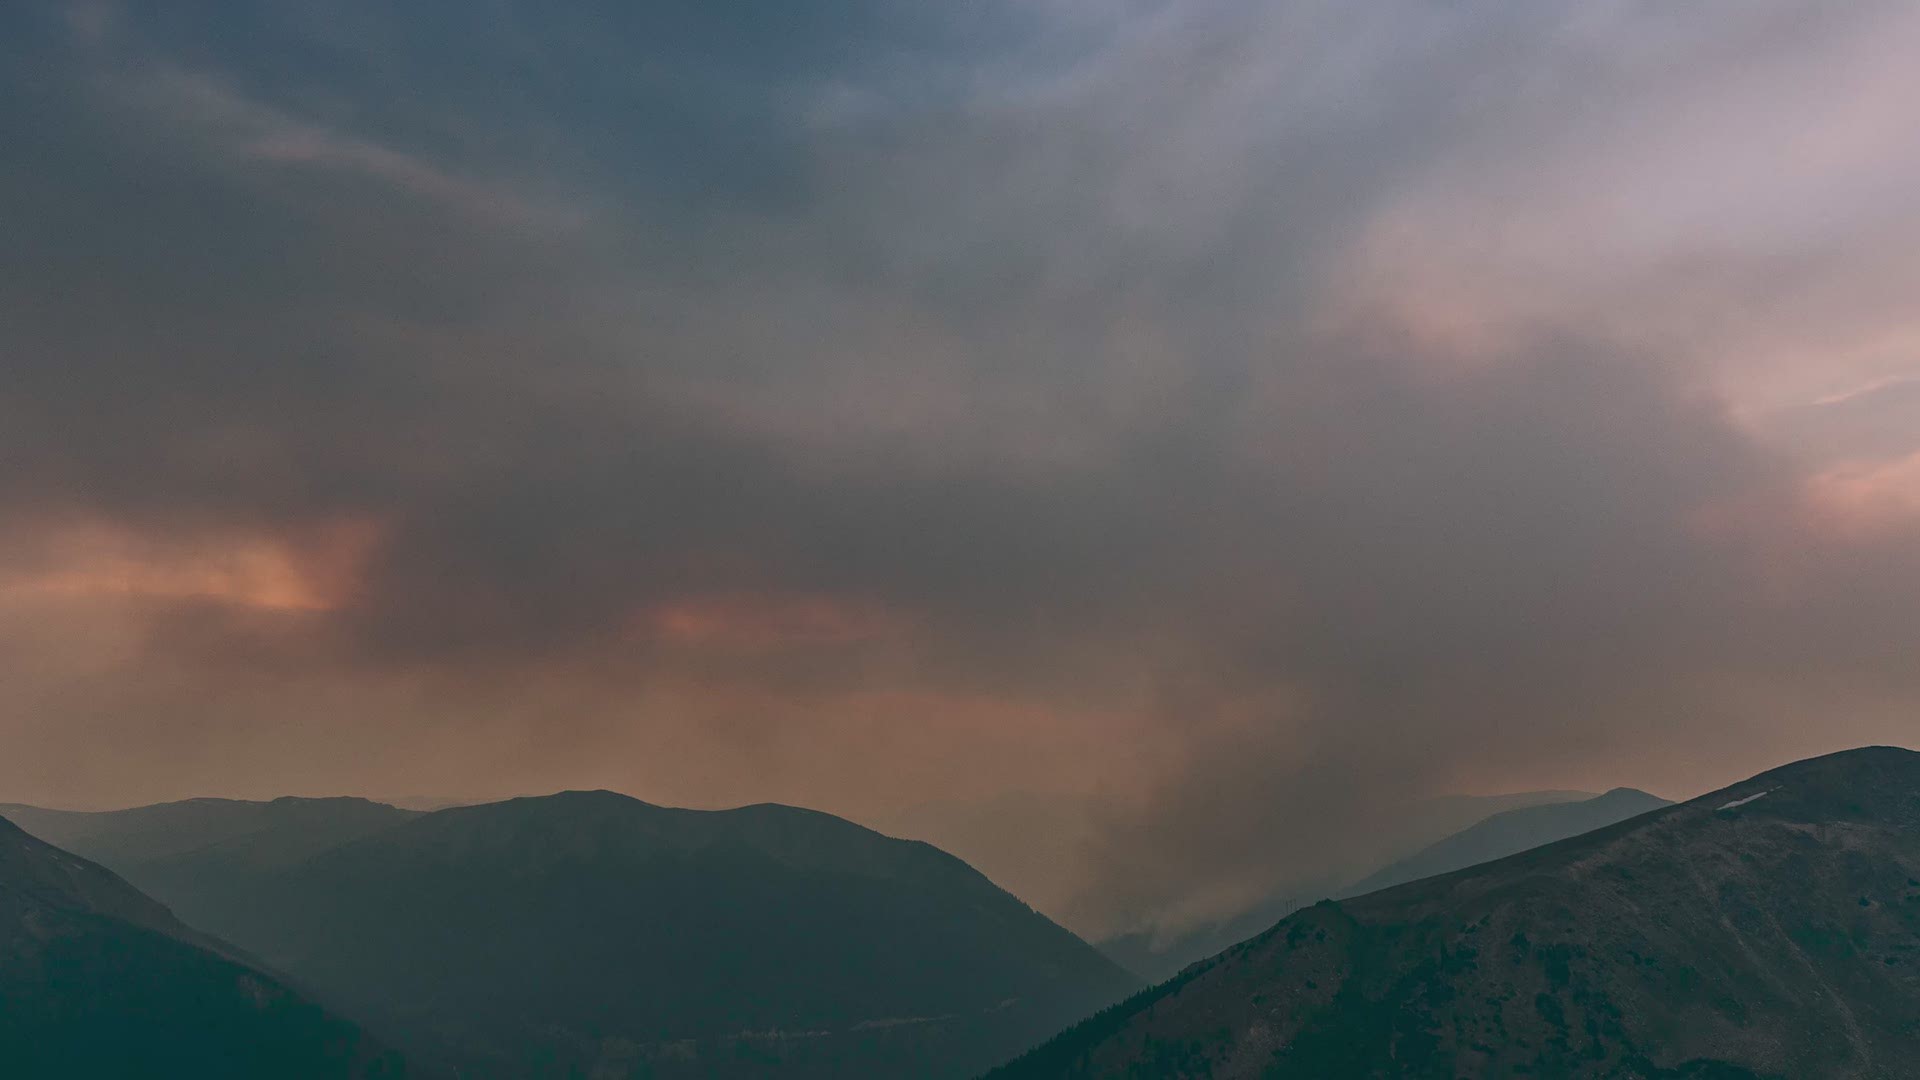 A timelapse of the Williams Fork Fire as it burned between Aug. 24 and Aug. 26.